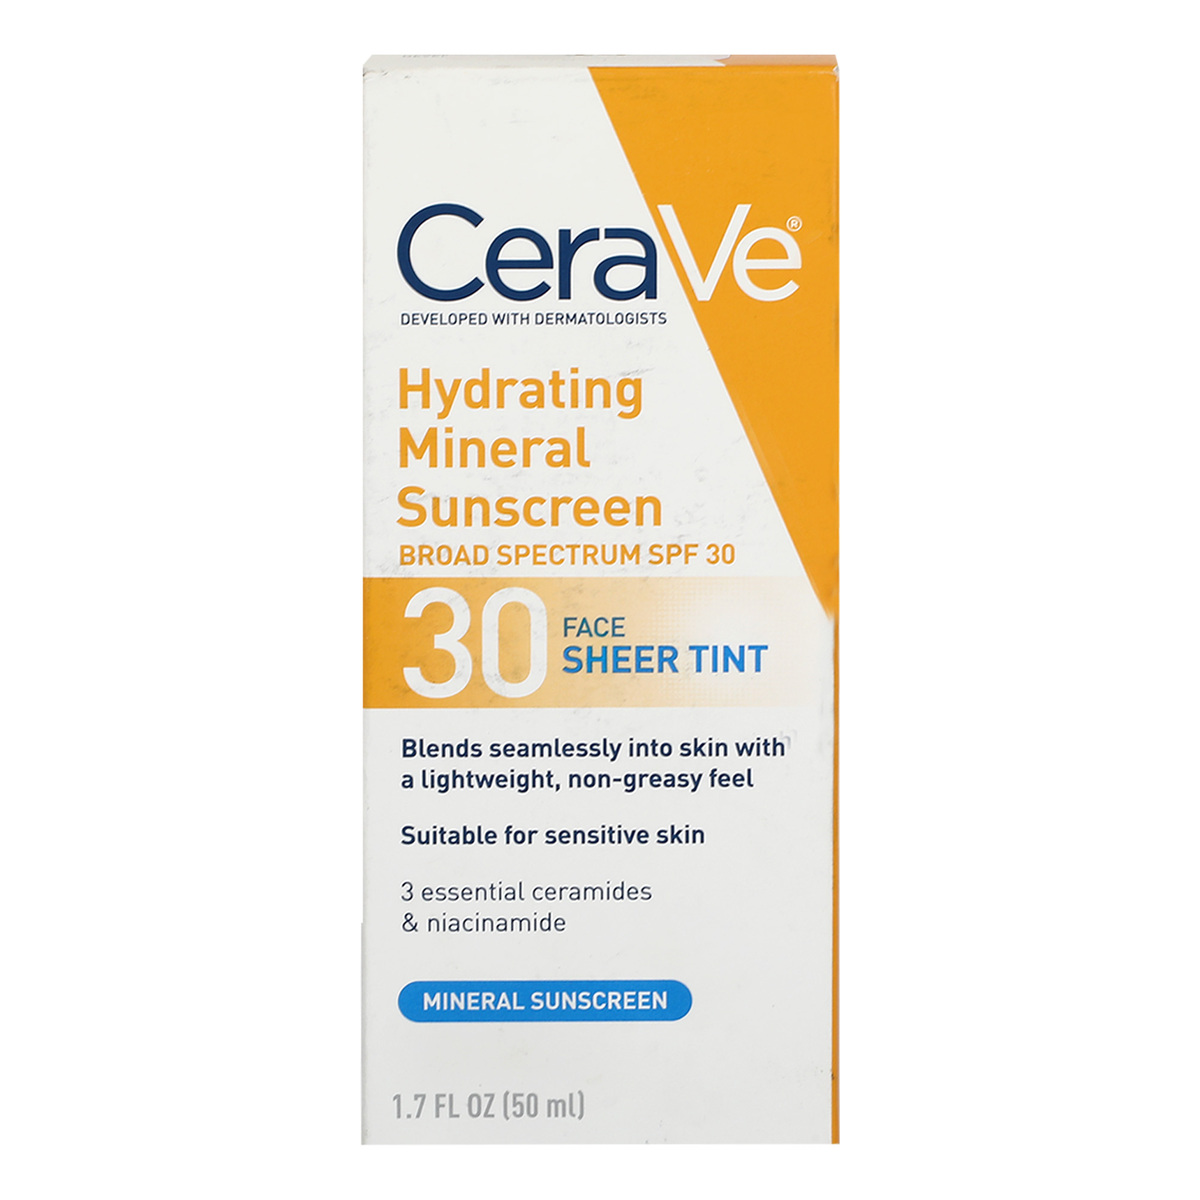 CeraVe Hydrating Mineral Sunscreen Broad Spectrum SPF 30, 50 ml